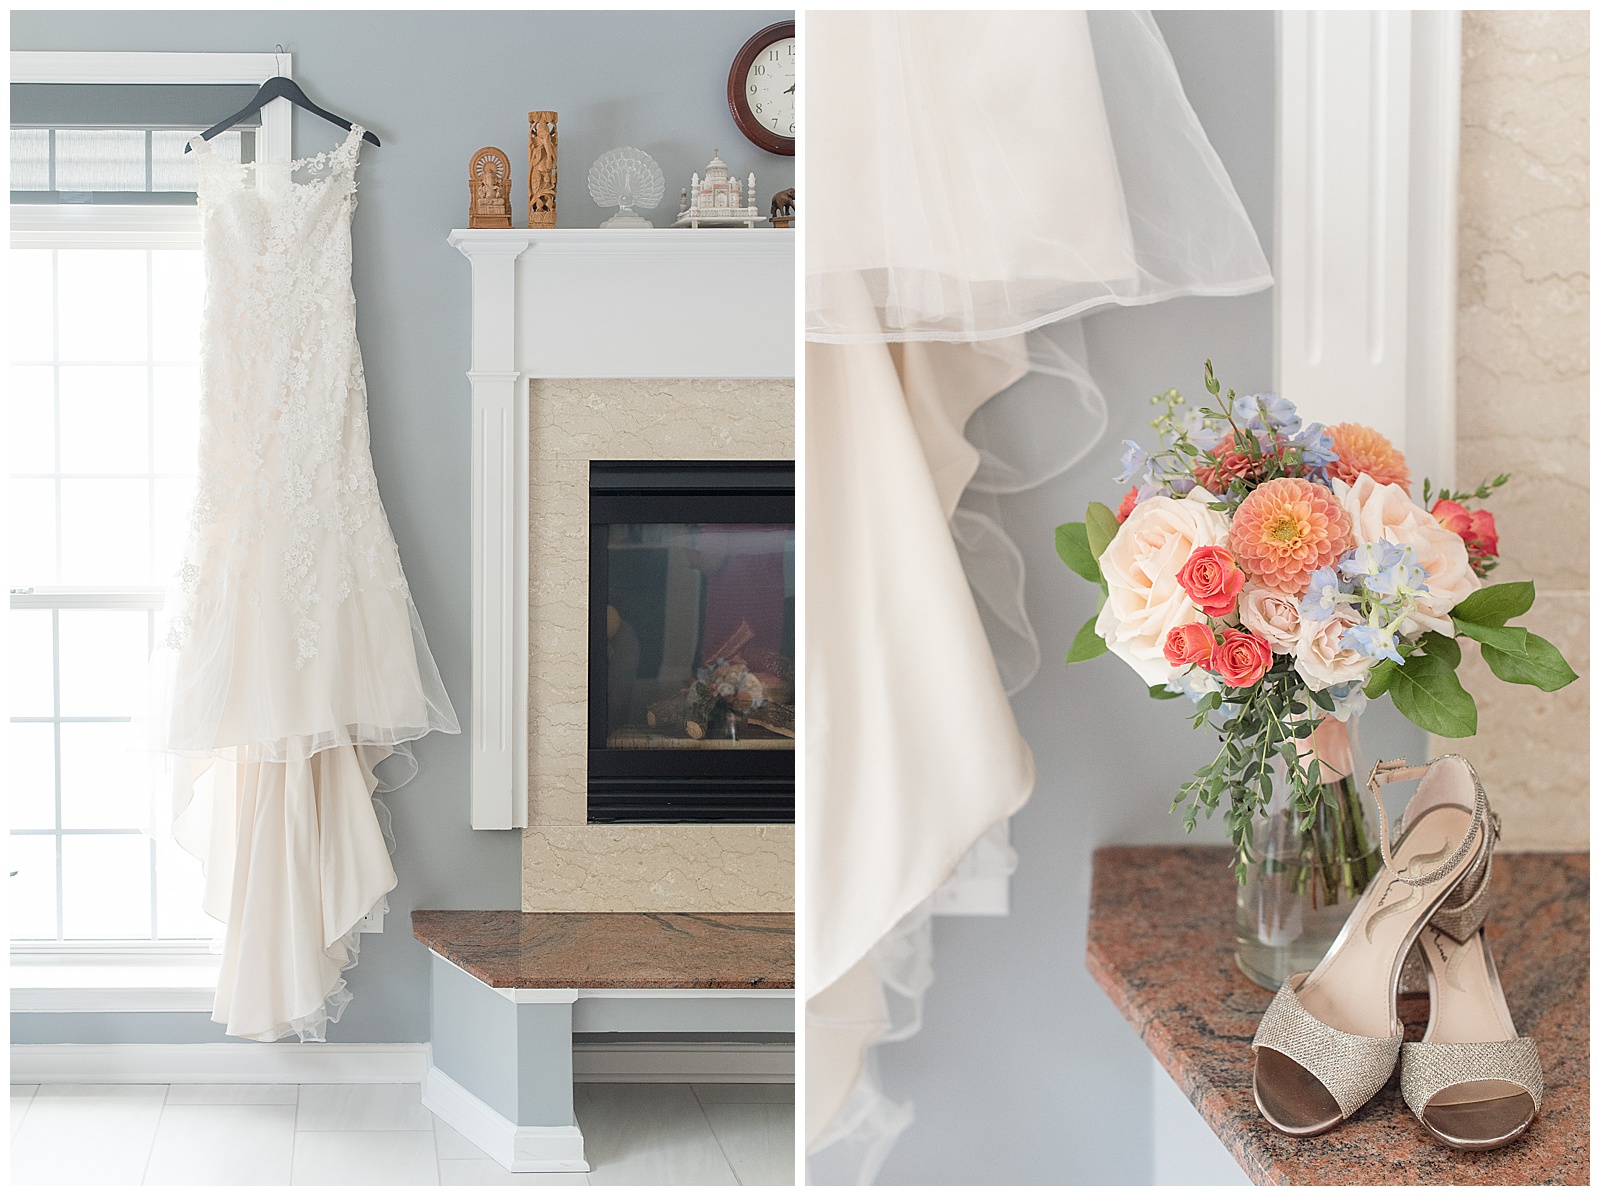 beautiful white wedding gown hanging beside fireplace against light blue wall along with other wedding details